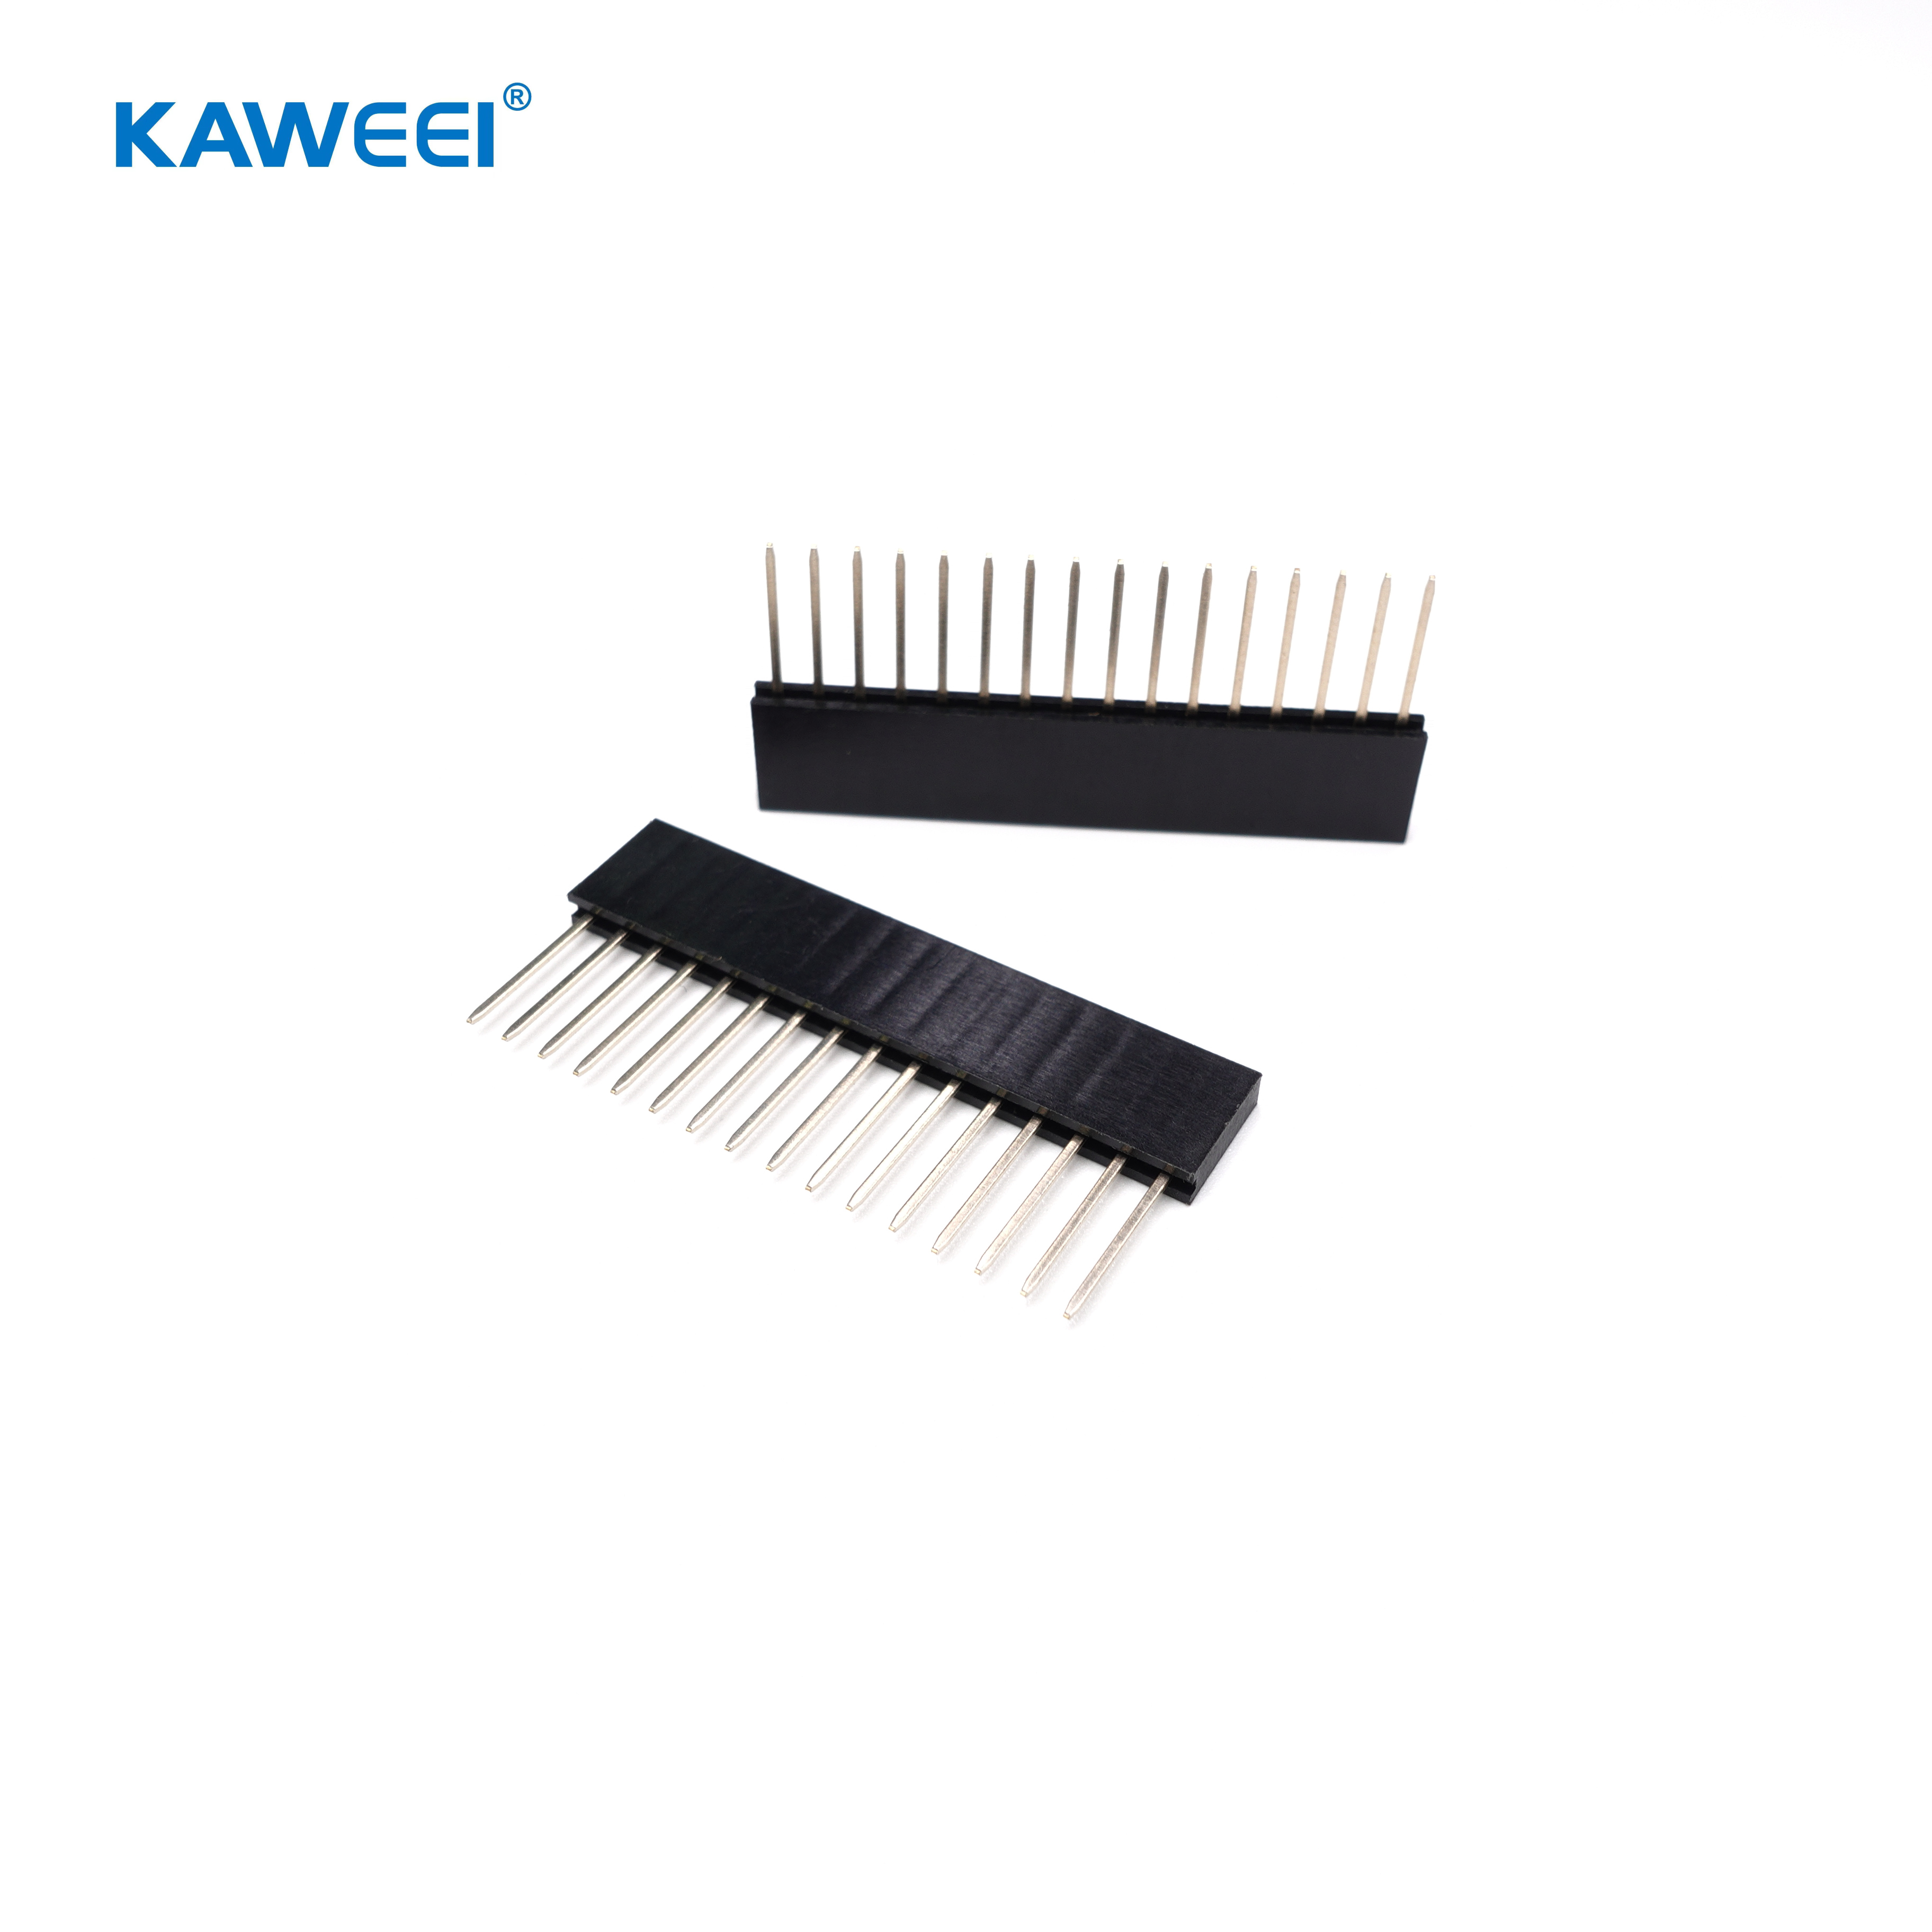 2.54mm Pitch Female Header Straight Type PCB Connector Board to Board Connector